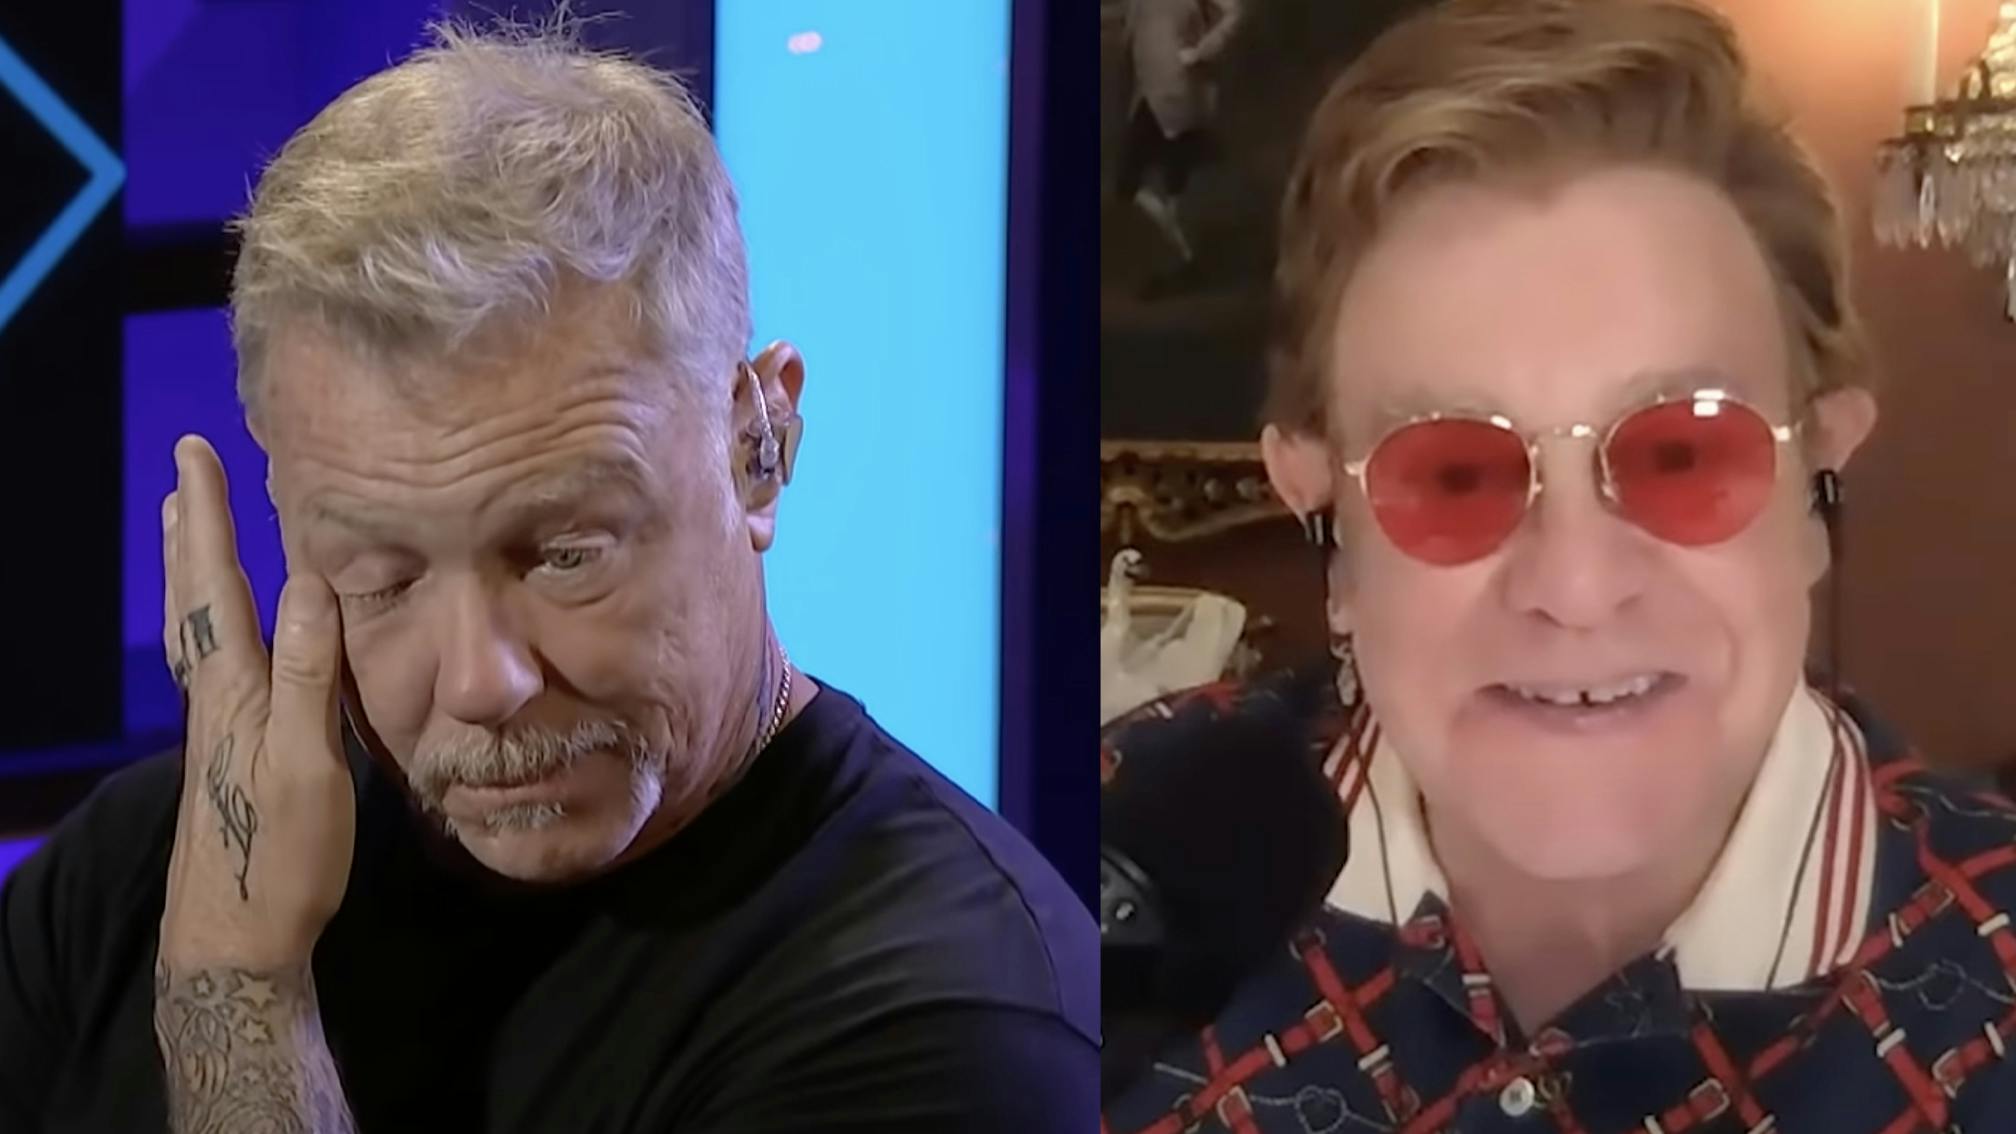 Elton John calls Nothing Else Matters "one of the best songs ever written", makes James Hetfield well up